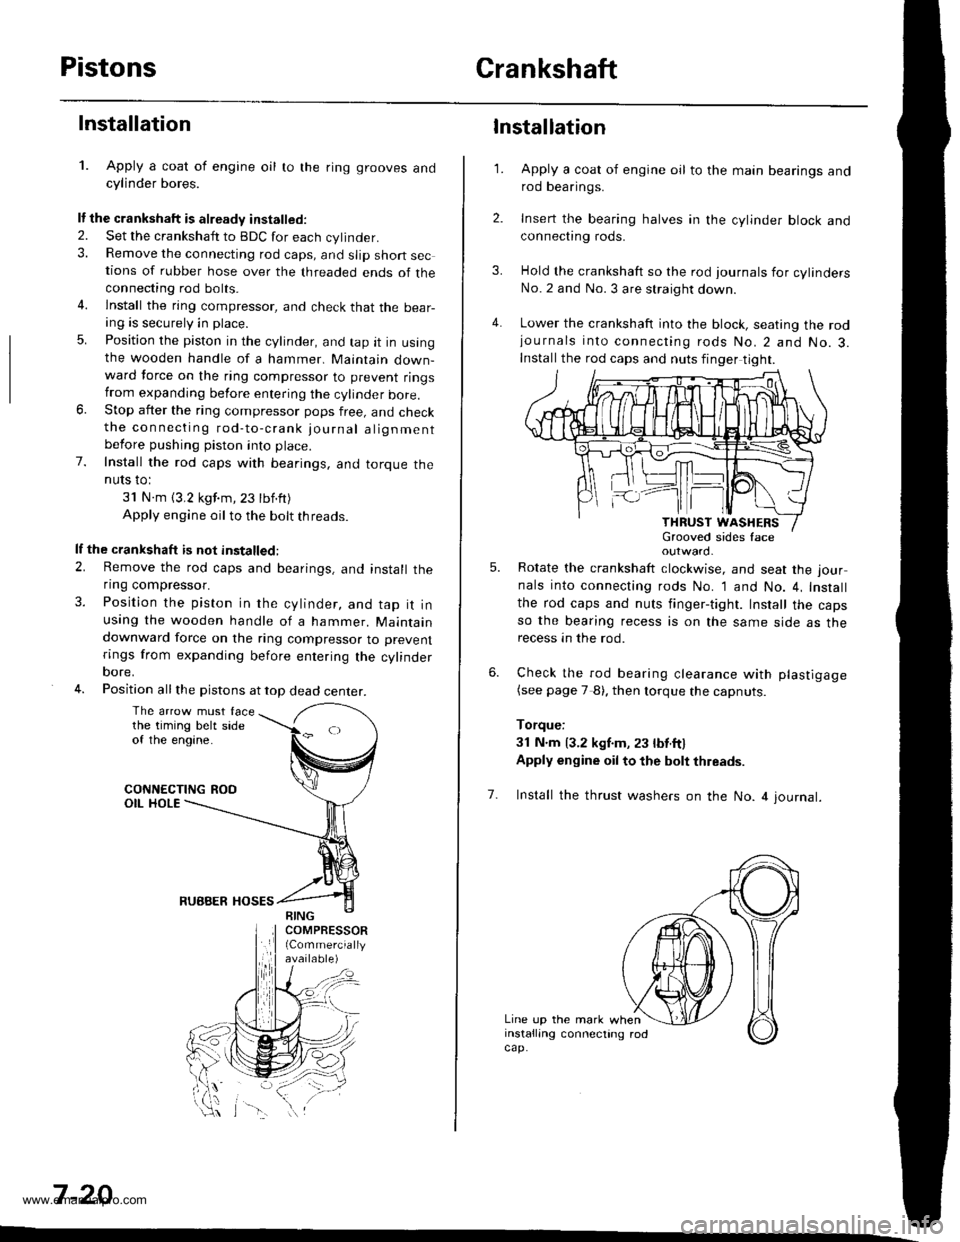 HONDA CR-V 1998 RD1-RD3 / 1.G Owners Manual 
PistonsCrankshaft
Installation
1. Apply a coat of engine oil to the ring grooves andcylinder bores.
It the crankshaft is already installed.
2. Set the crankshatt to BDC for each cylinder.3. Remove th